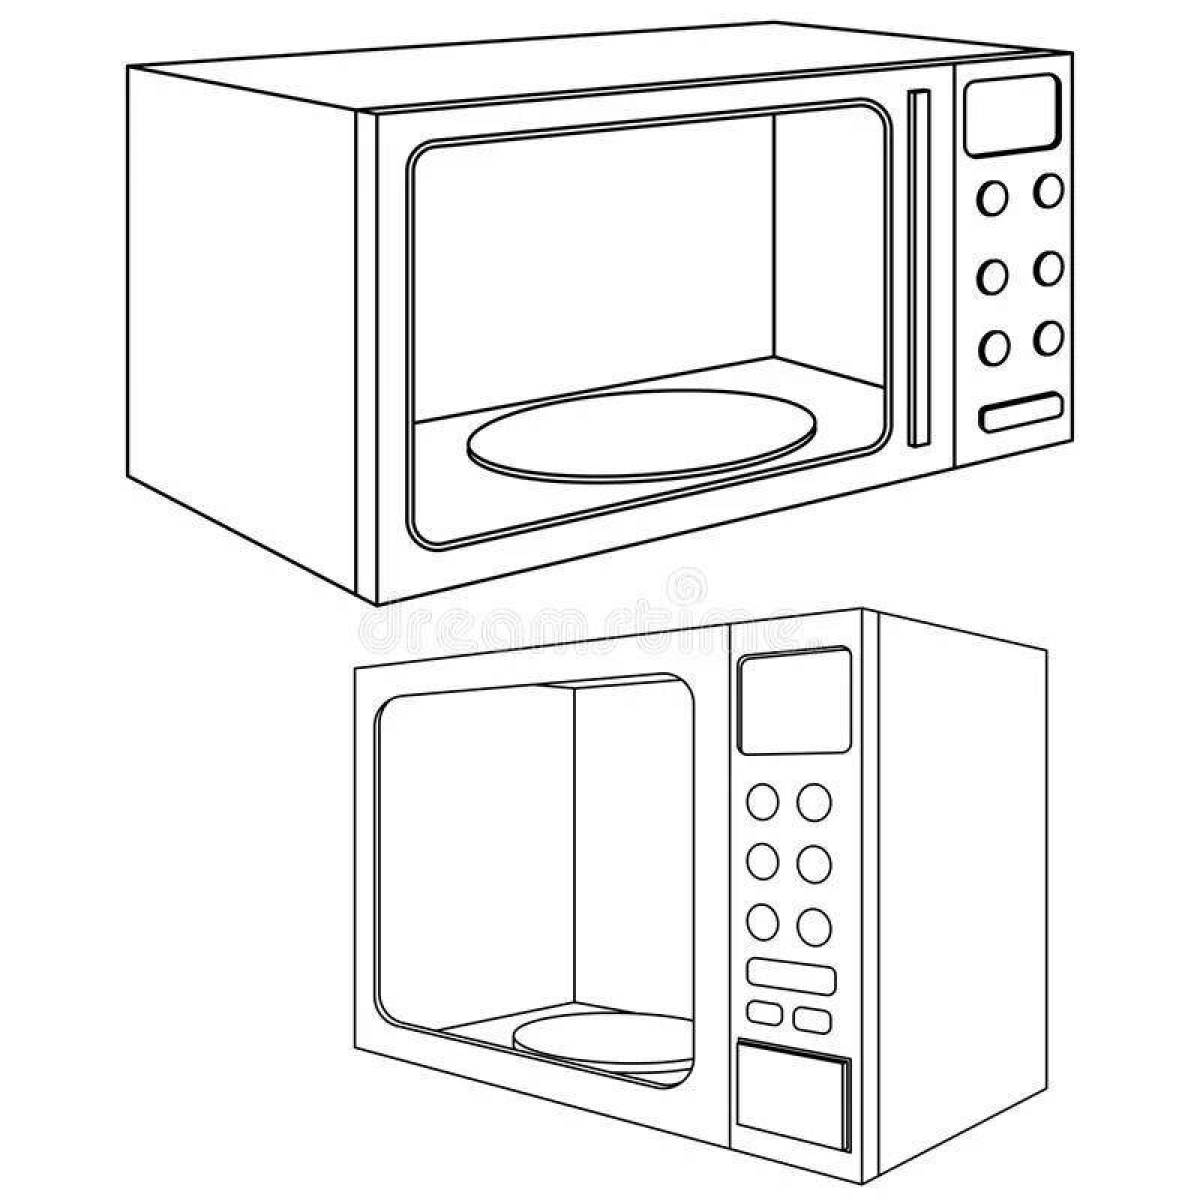 Great microwave coloring book